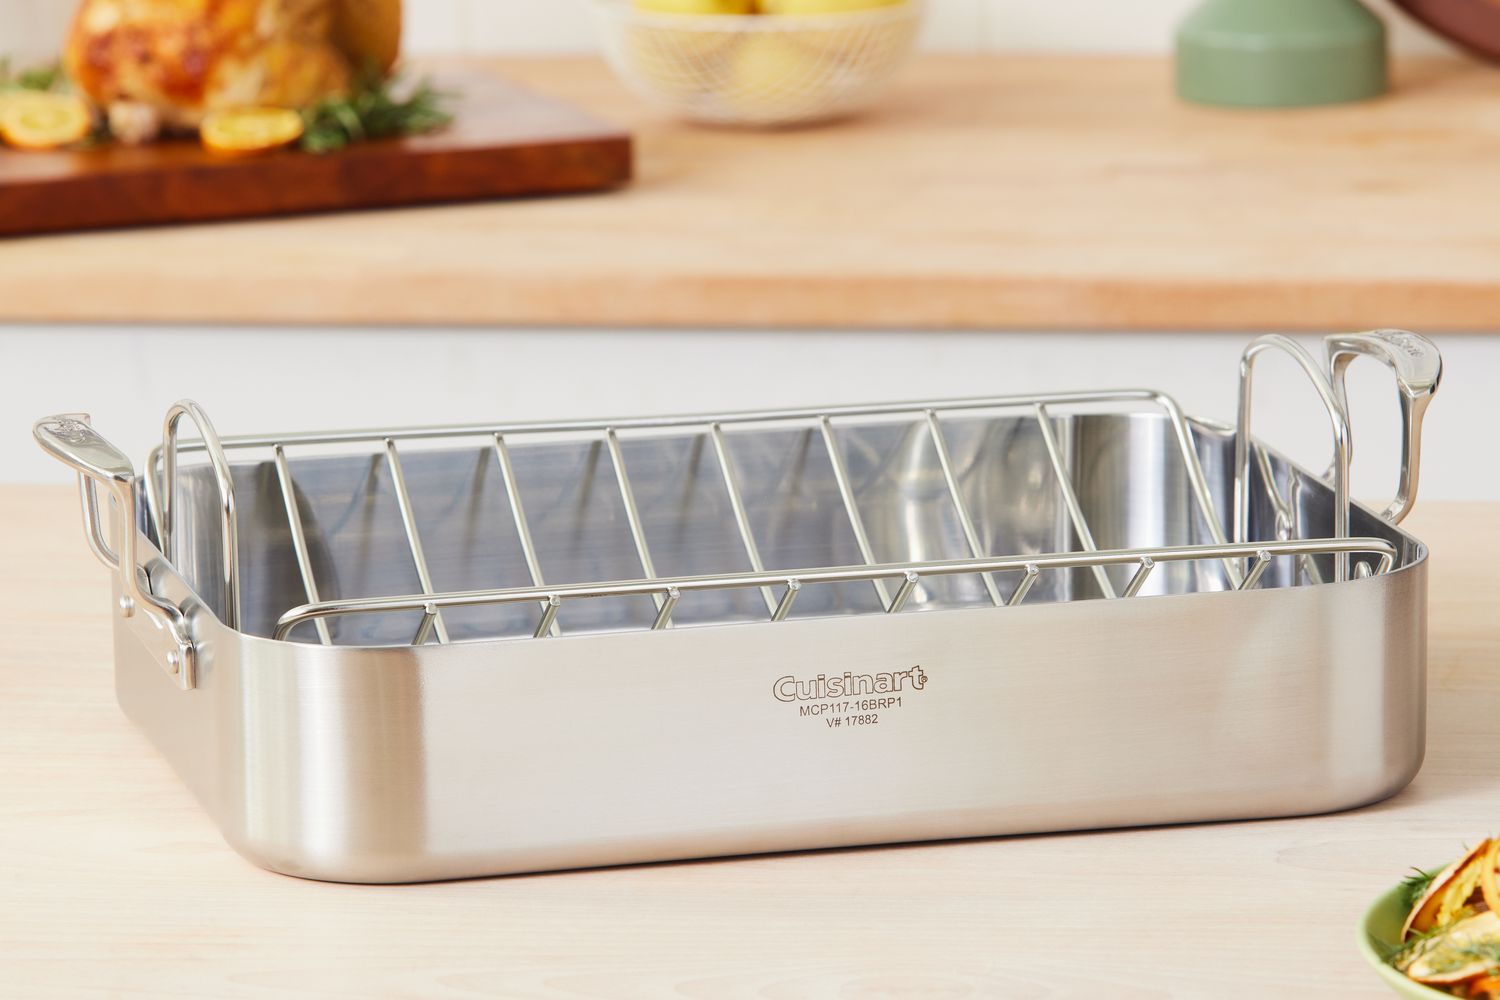 Cuisinart MultiClad Pro Stainless 16-Inch Rectangular Roaster with Rack displayed on a wood kitchen counter